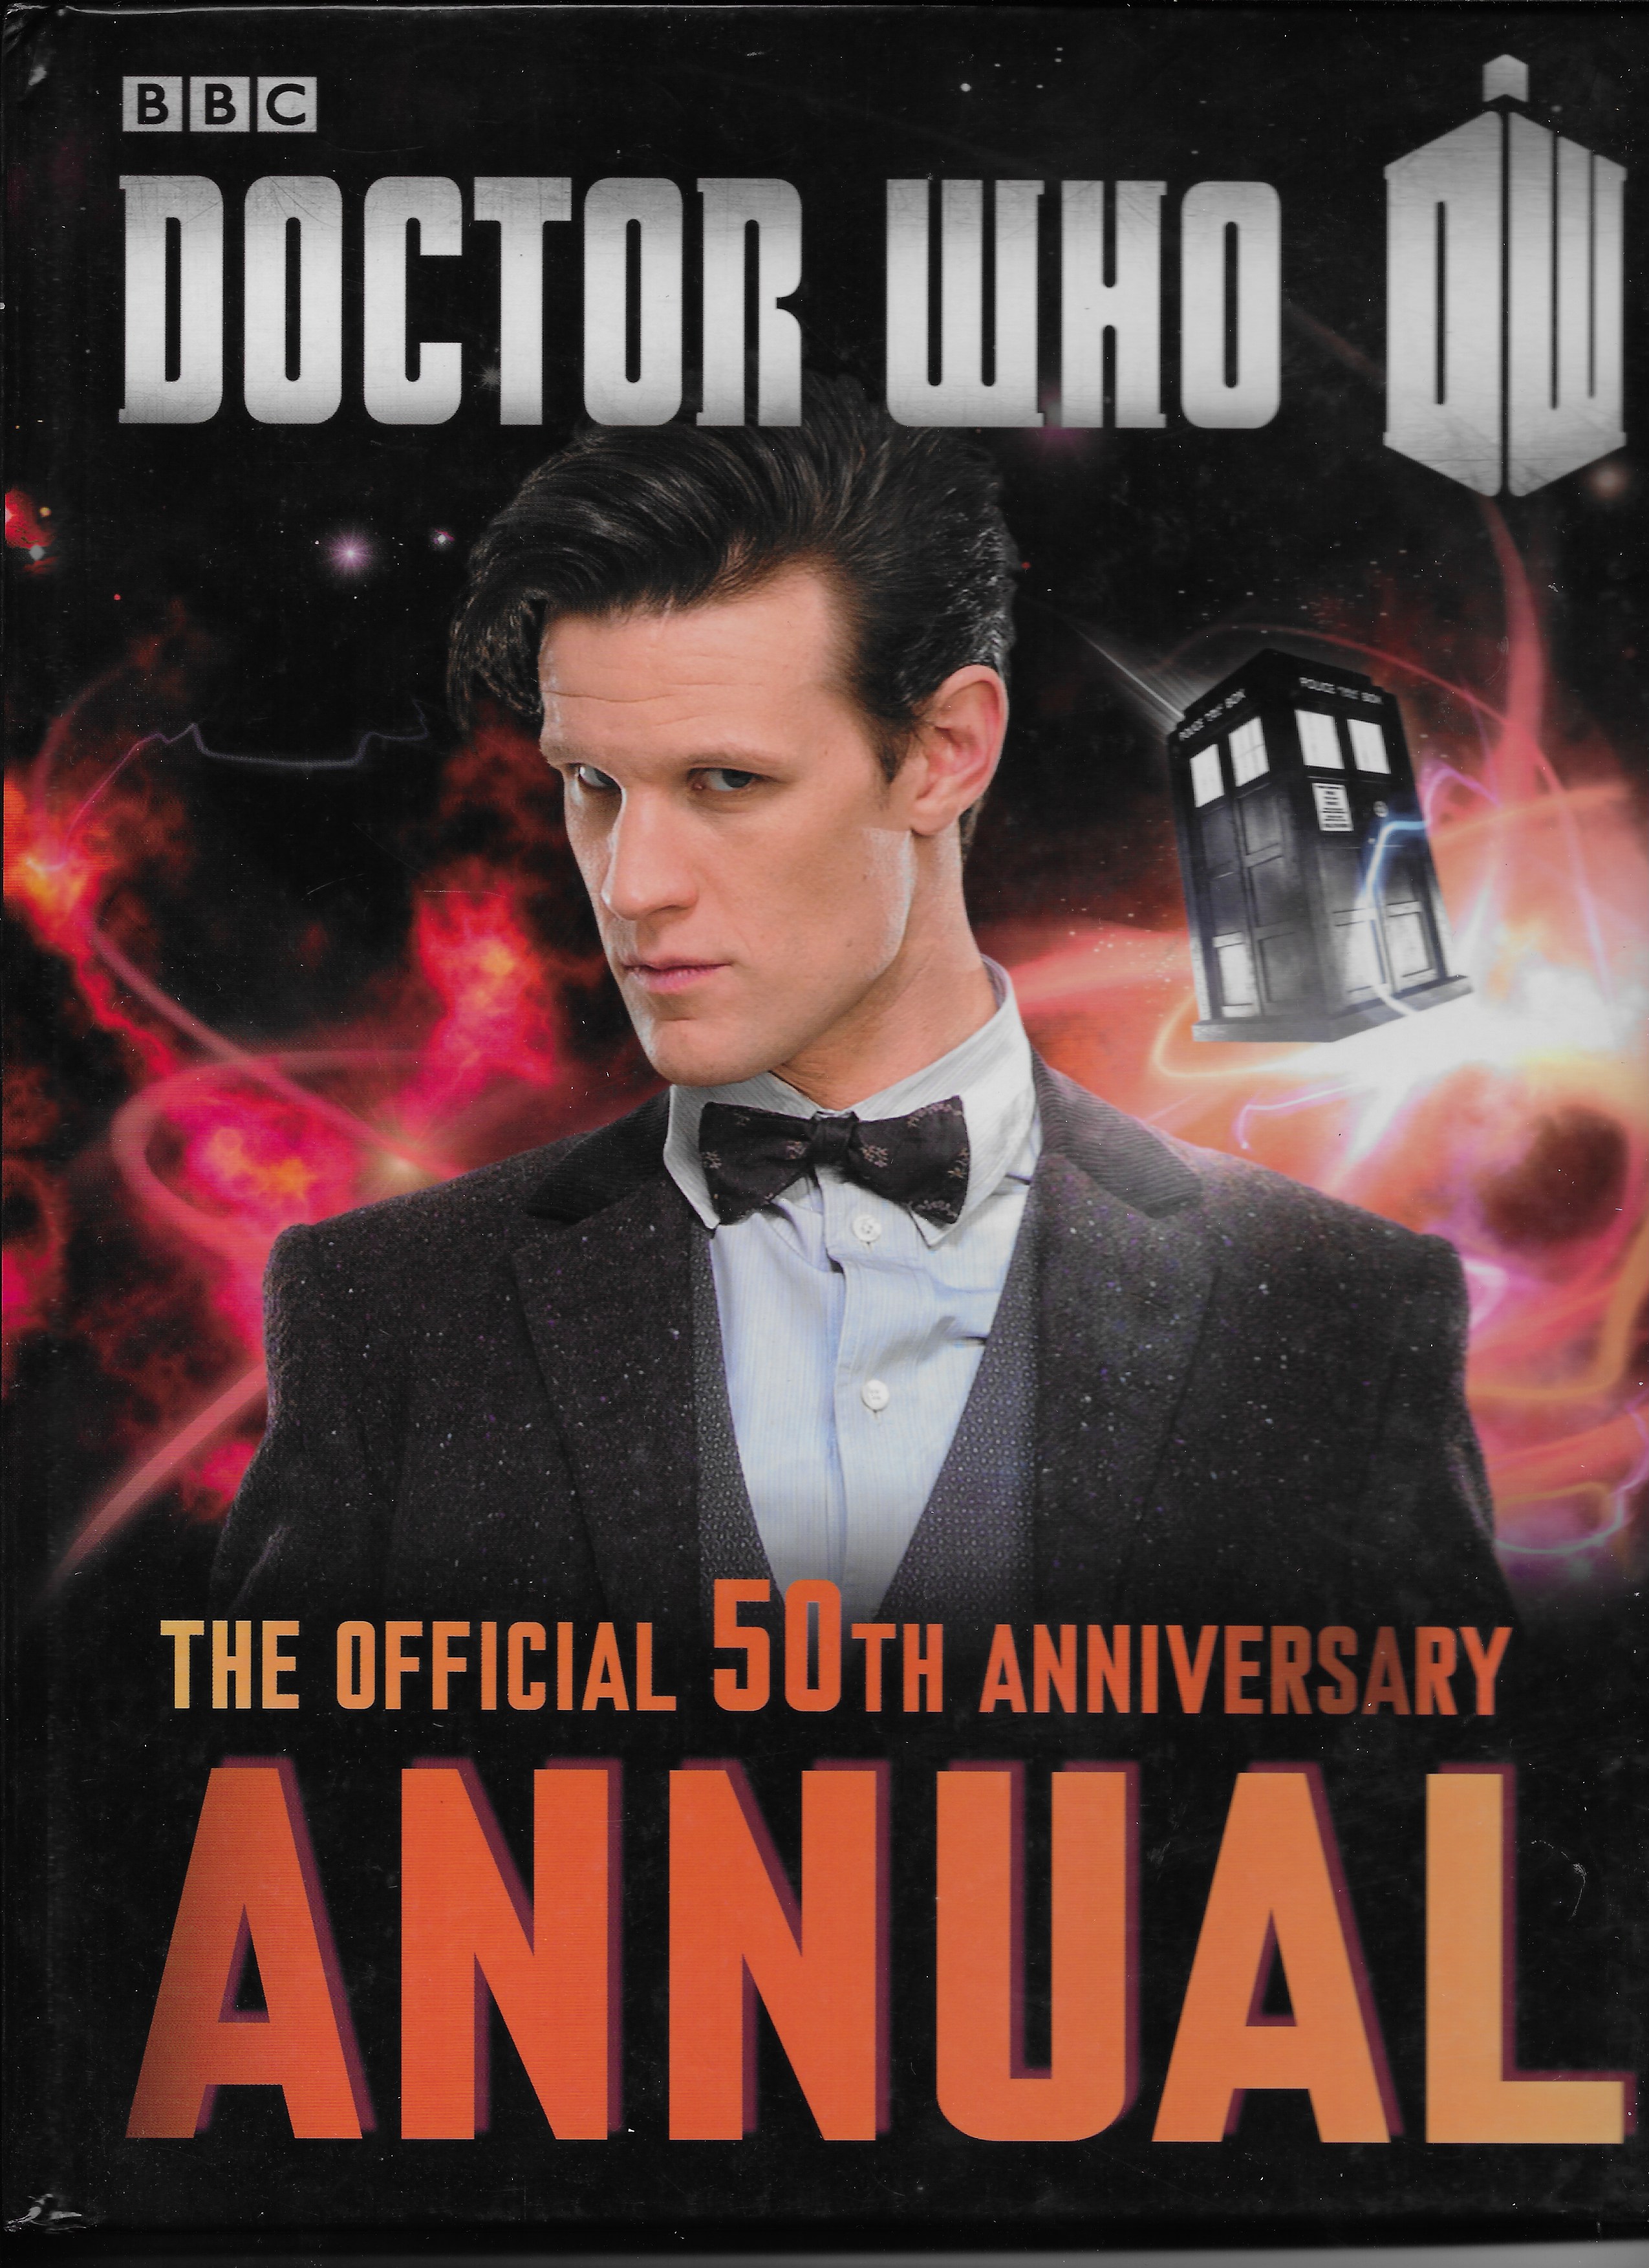 Picture of Doctor Who - The official 50th anniversary annual by artist Various from the BBC books - Records and Tapes library